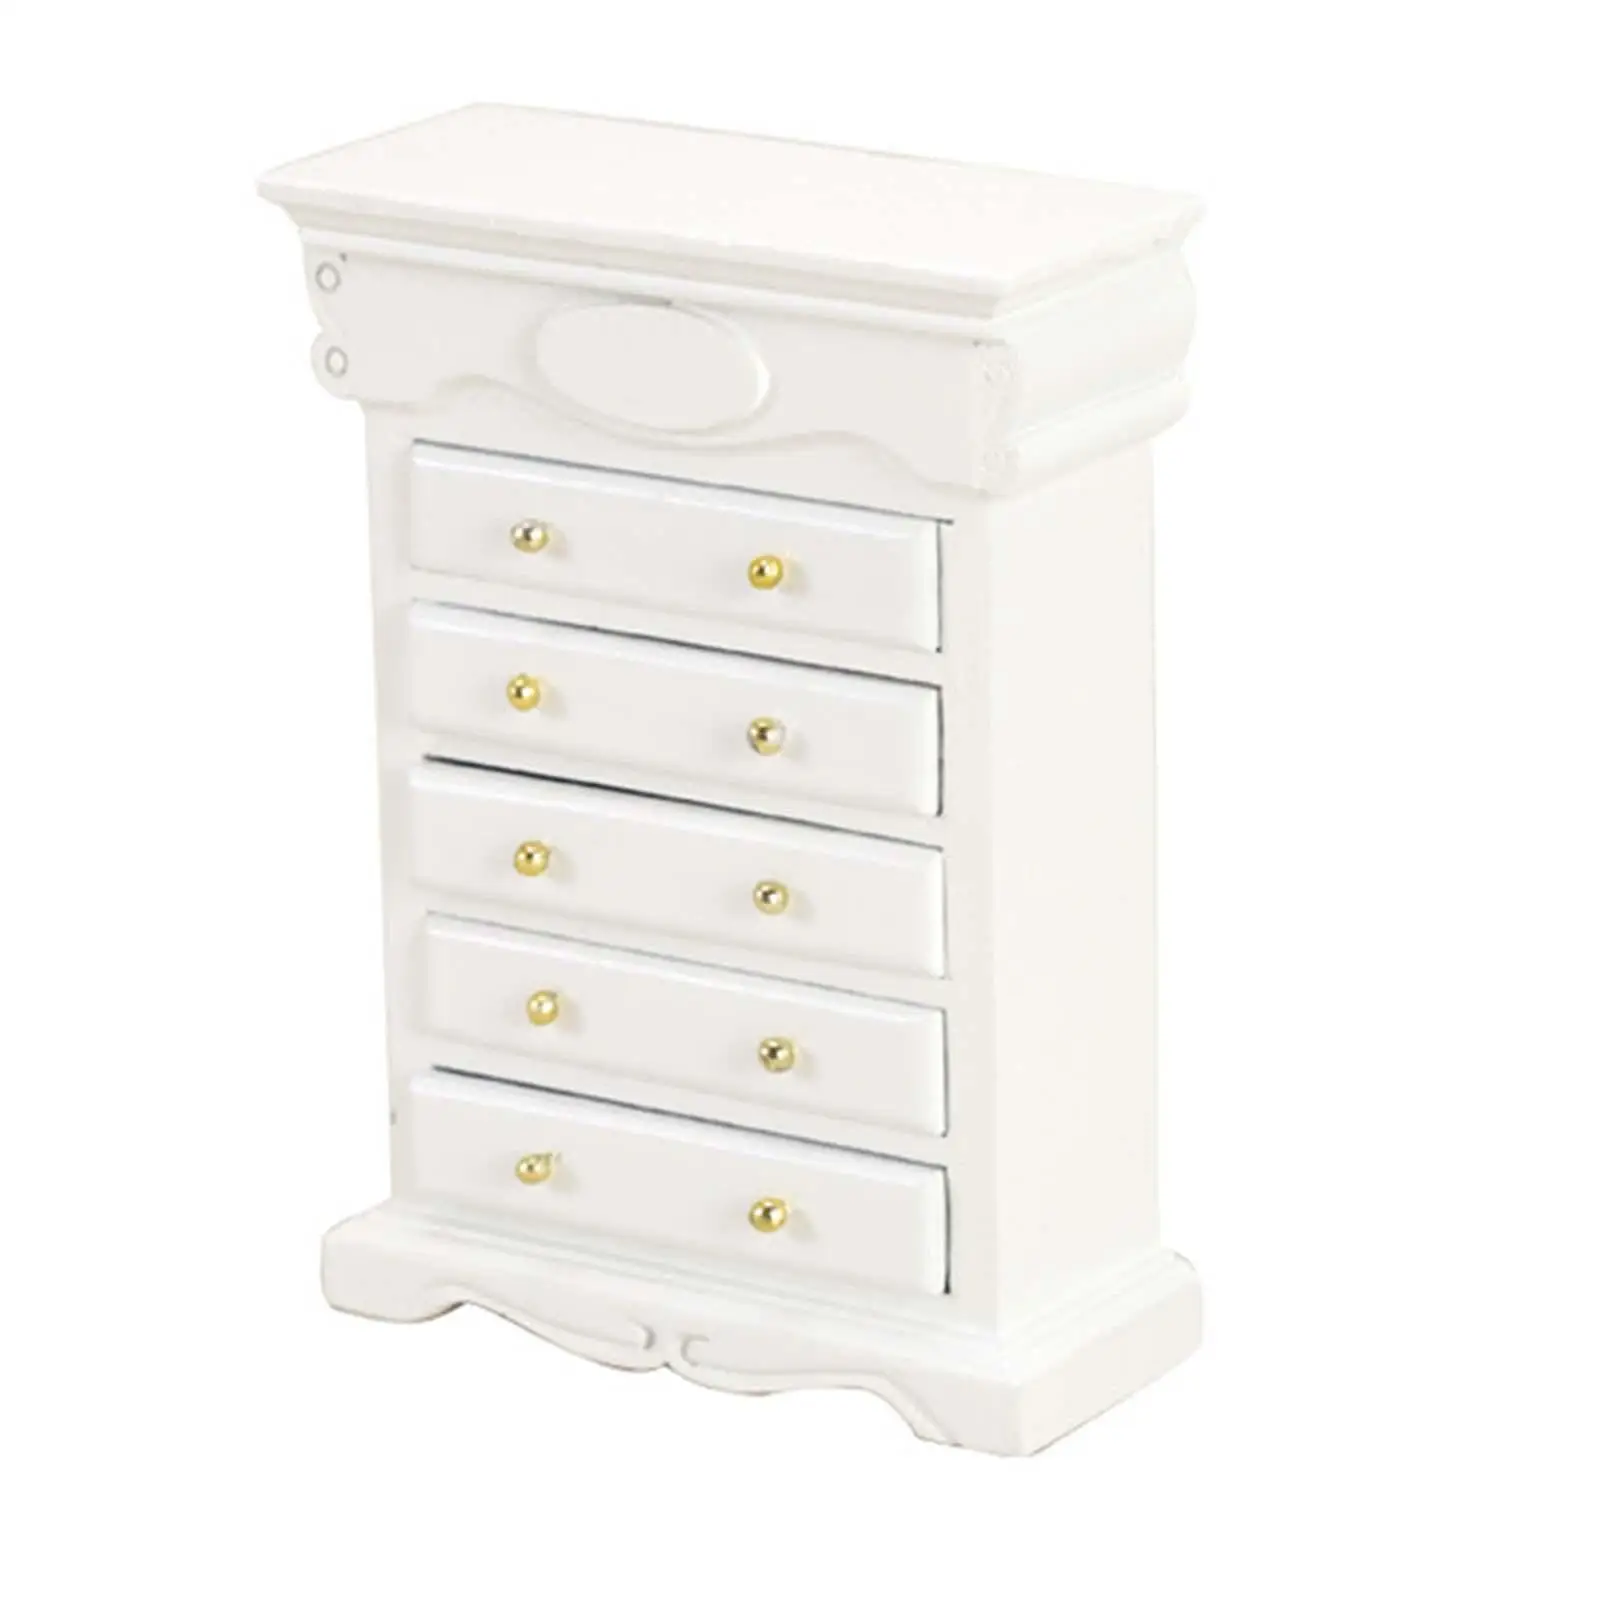 Mini Drawer Cabinet Artificial Cabinet Model Simulation Photo Props 1/12 Miniature Cabinet for Bedroom Living Room Decor